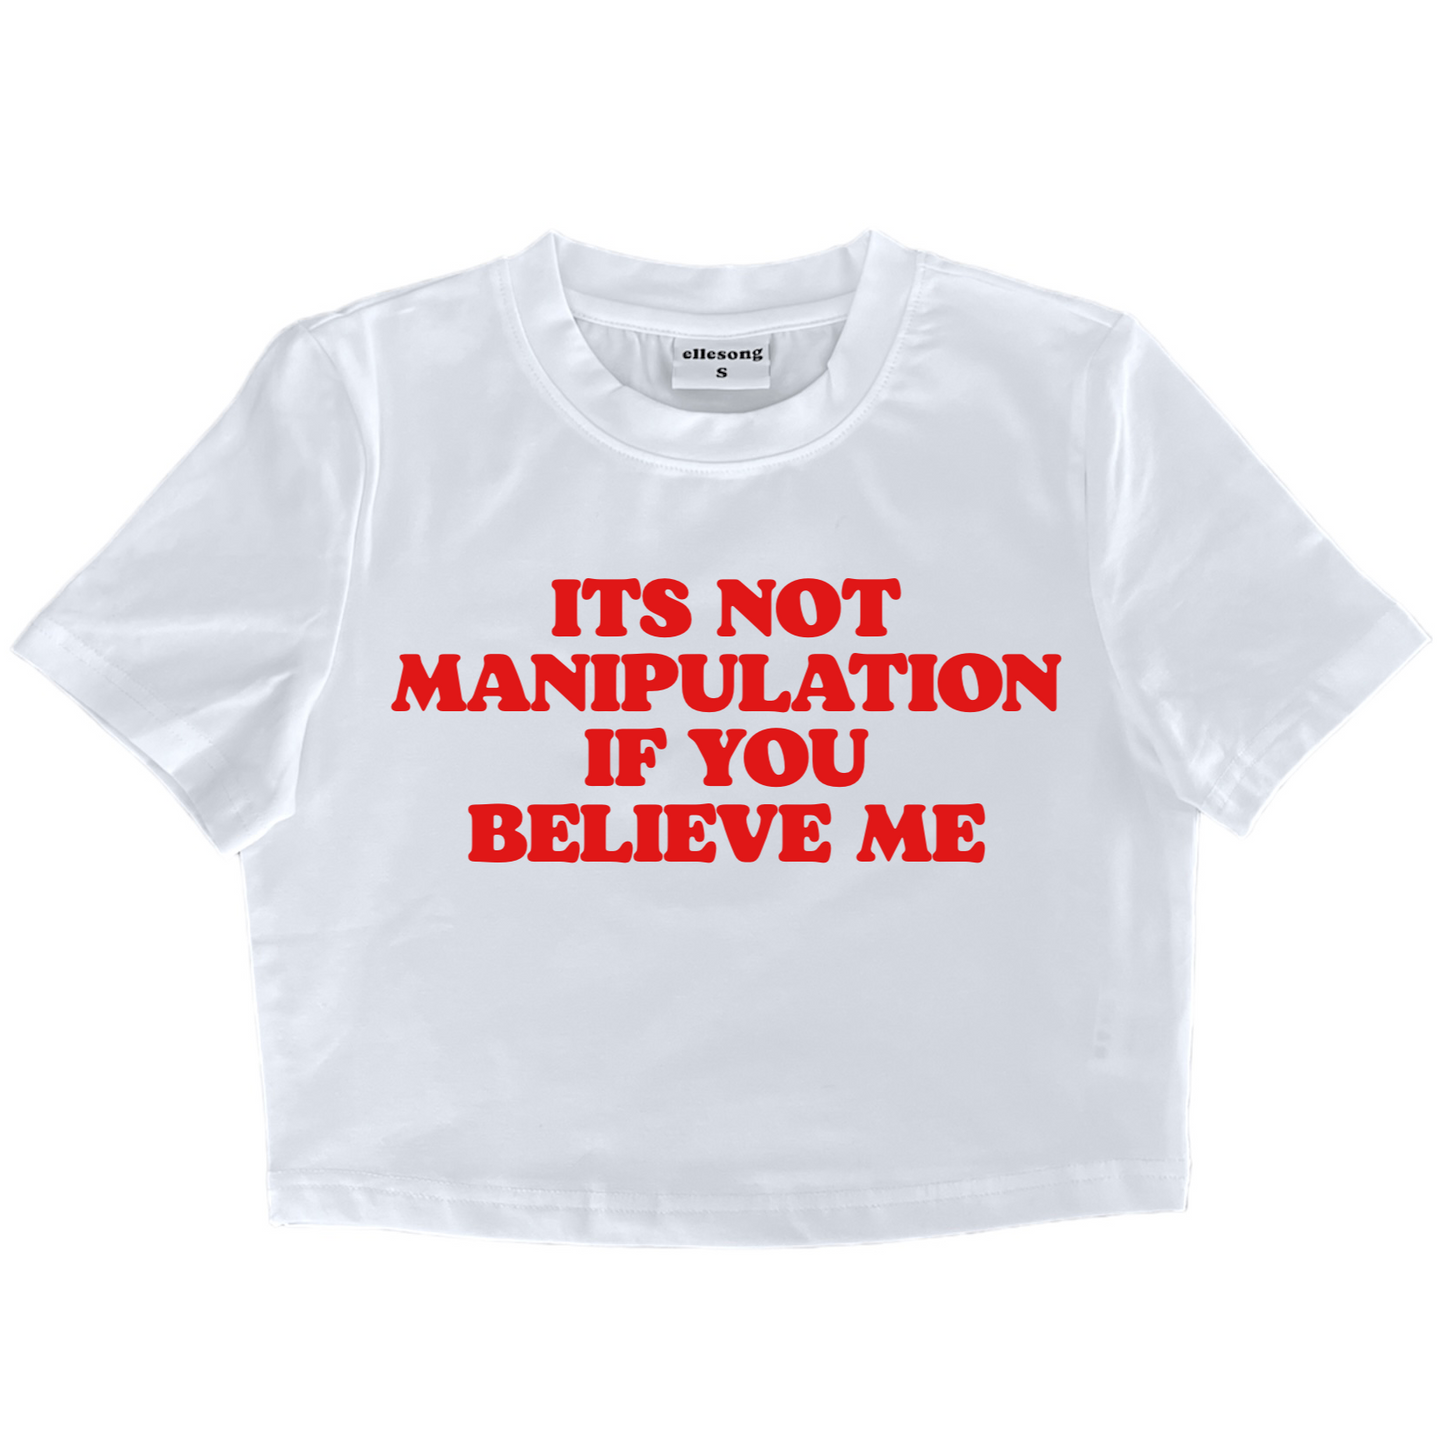 It’s Not Manipulation If You Believe Me Baby Tee